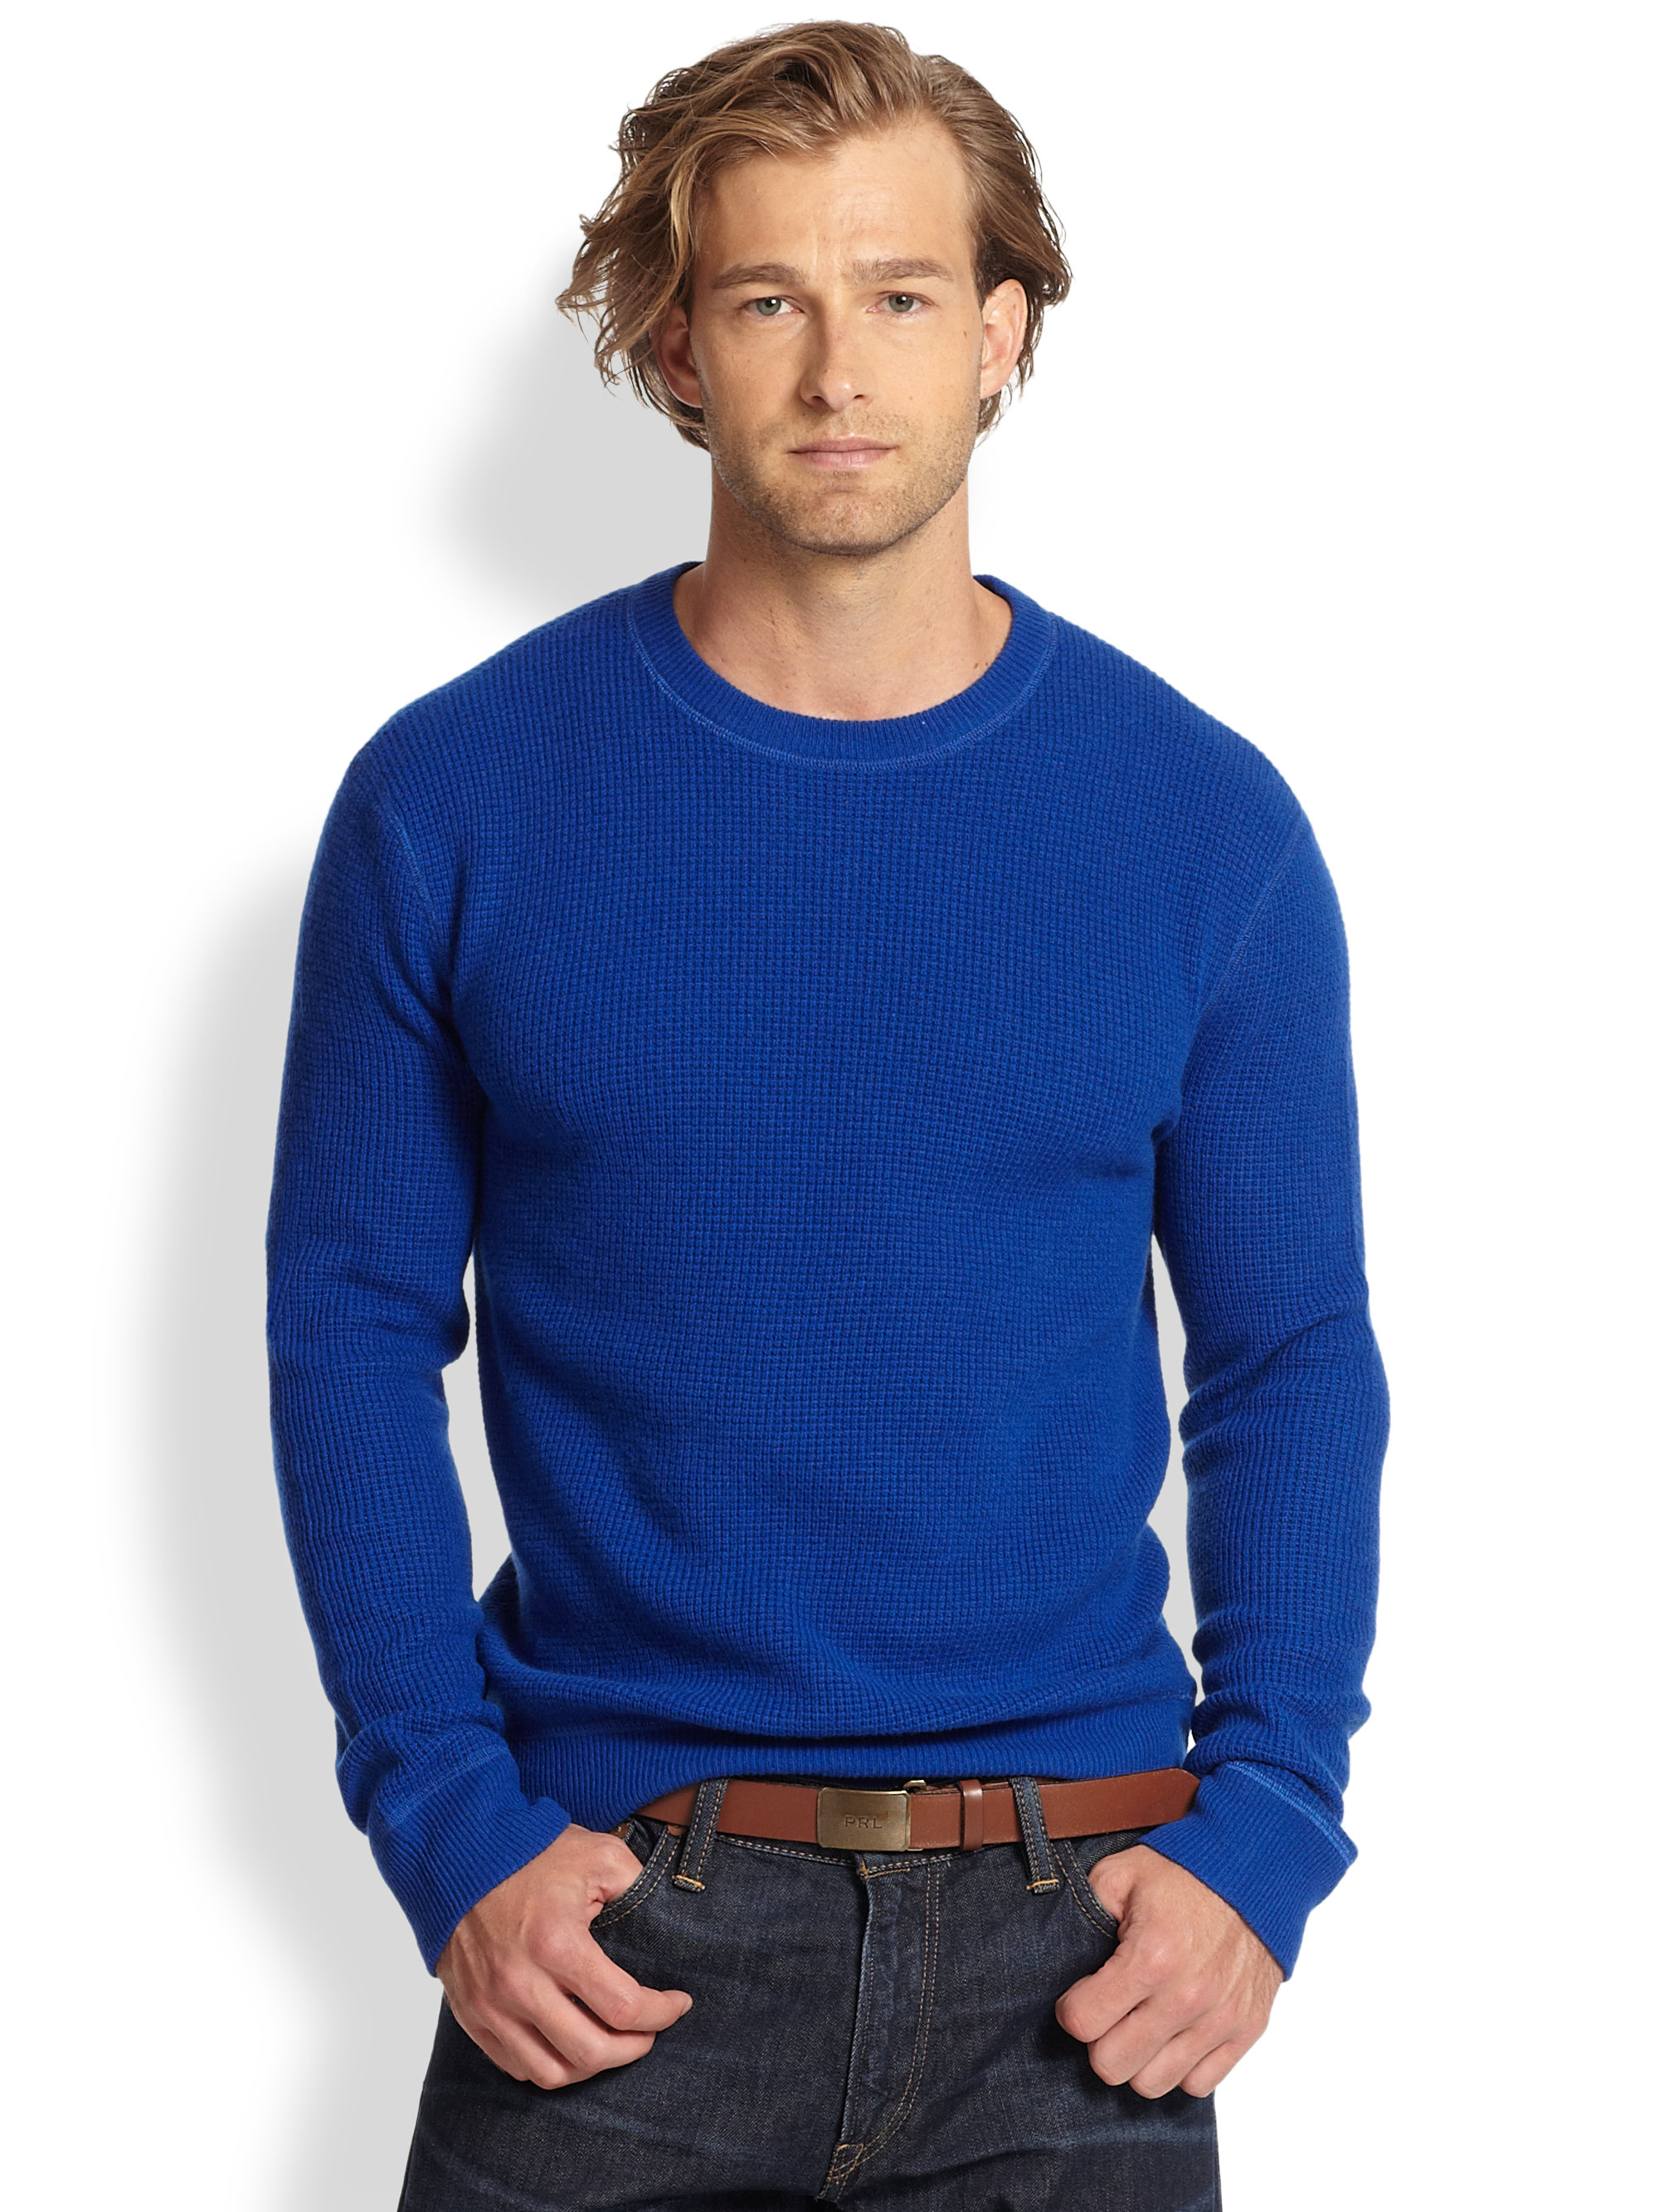 Lyst - Polo Ralph Lauren Cashmere Waffle-Knit Sweater in Blue for Men